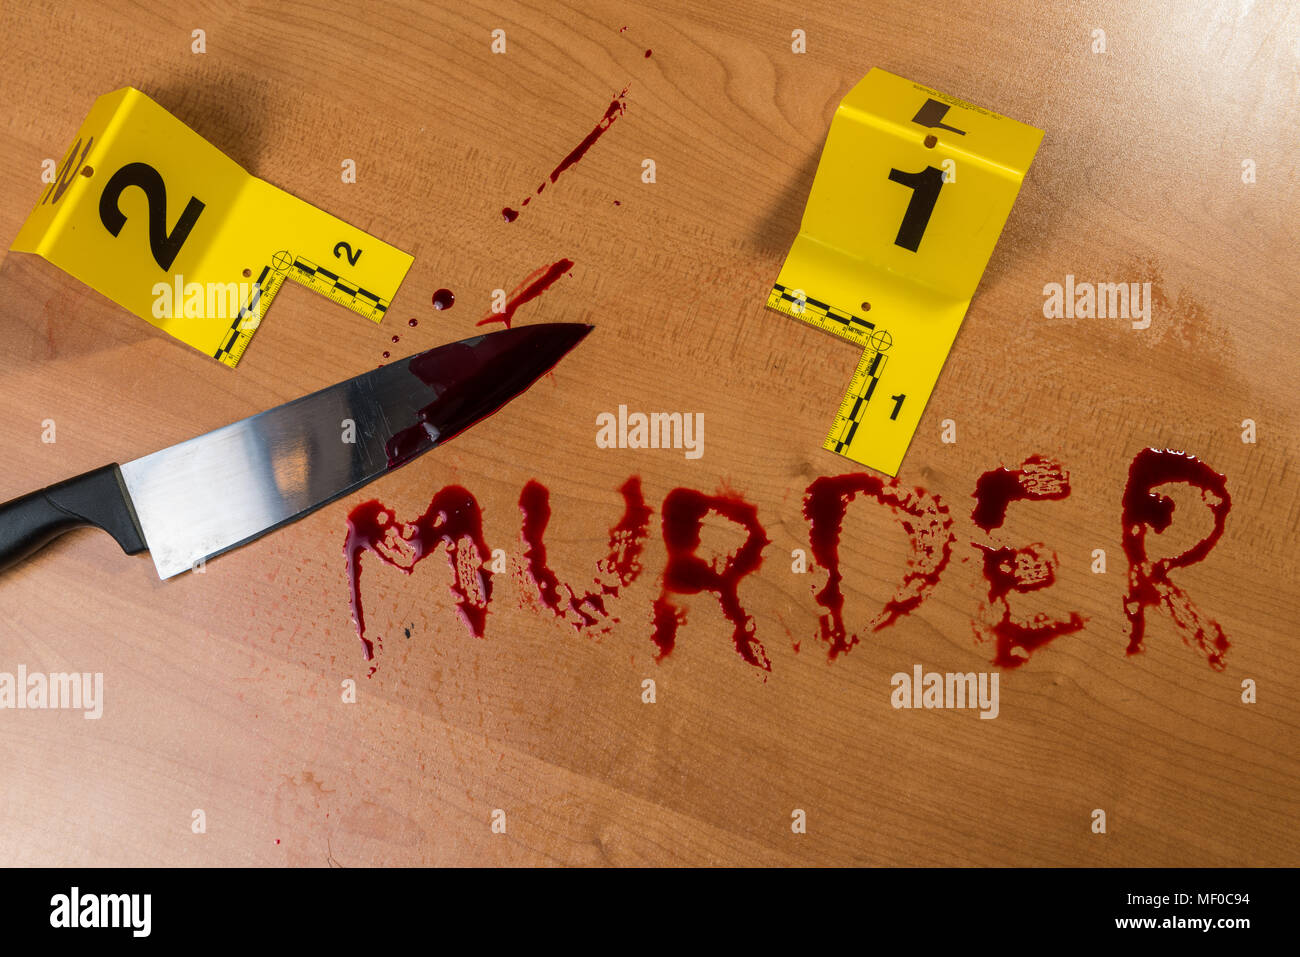 The word “murder” written in blood on a wood surface beside a bloody knife, both marked by crime scene evidence markers. Stock Photo